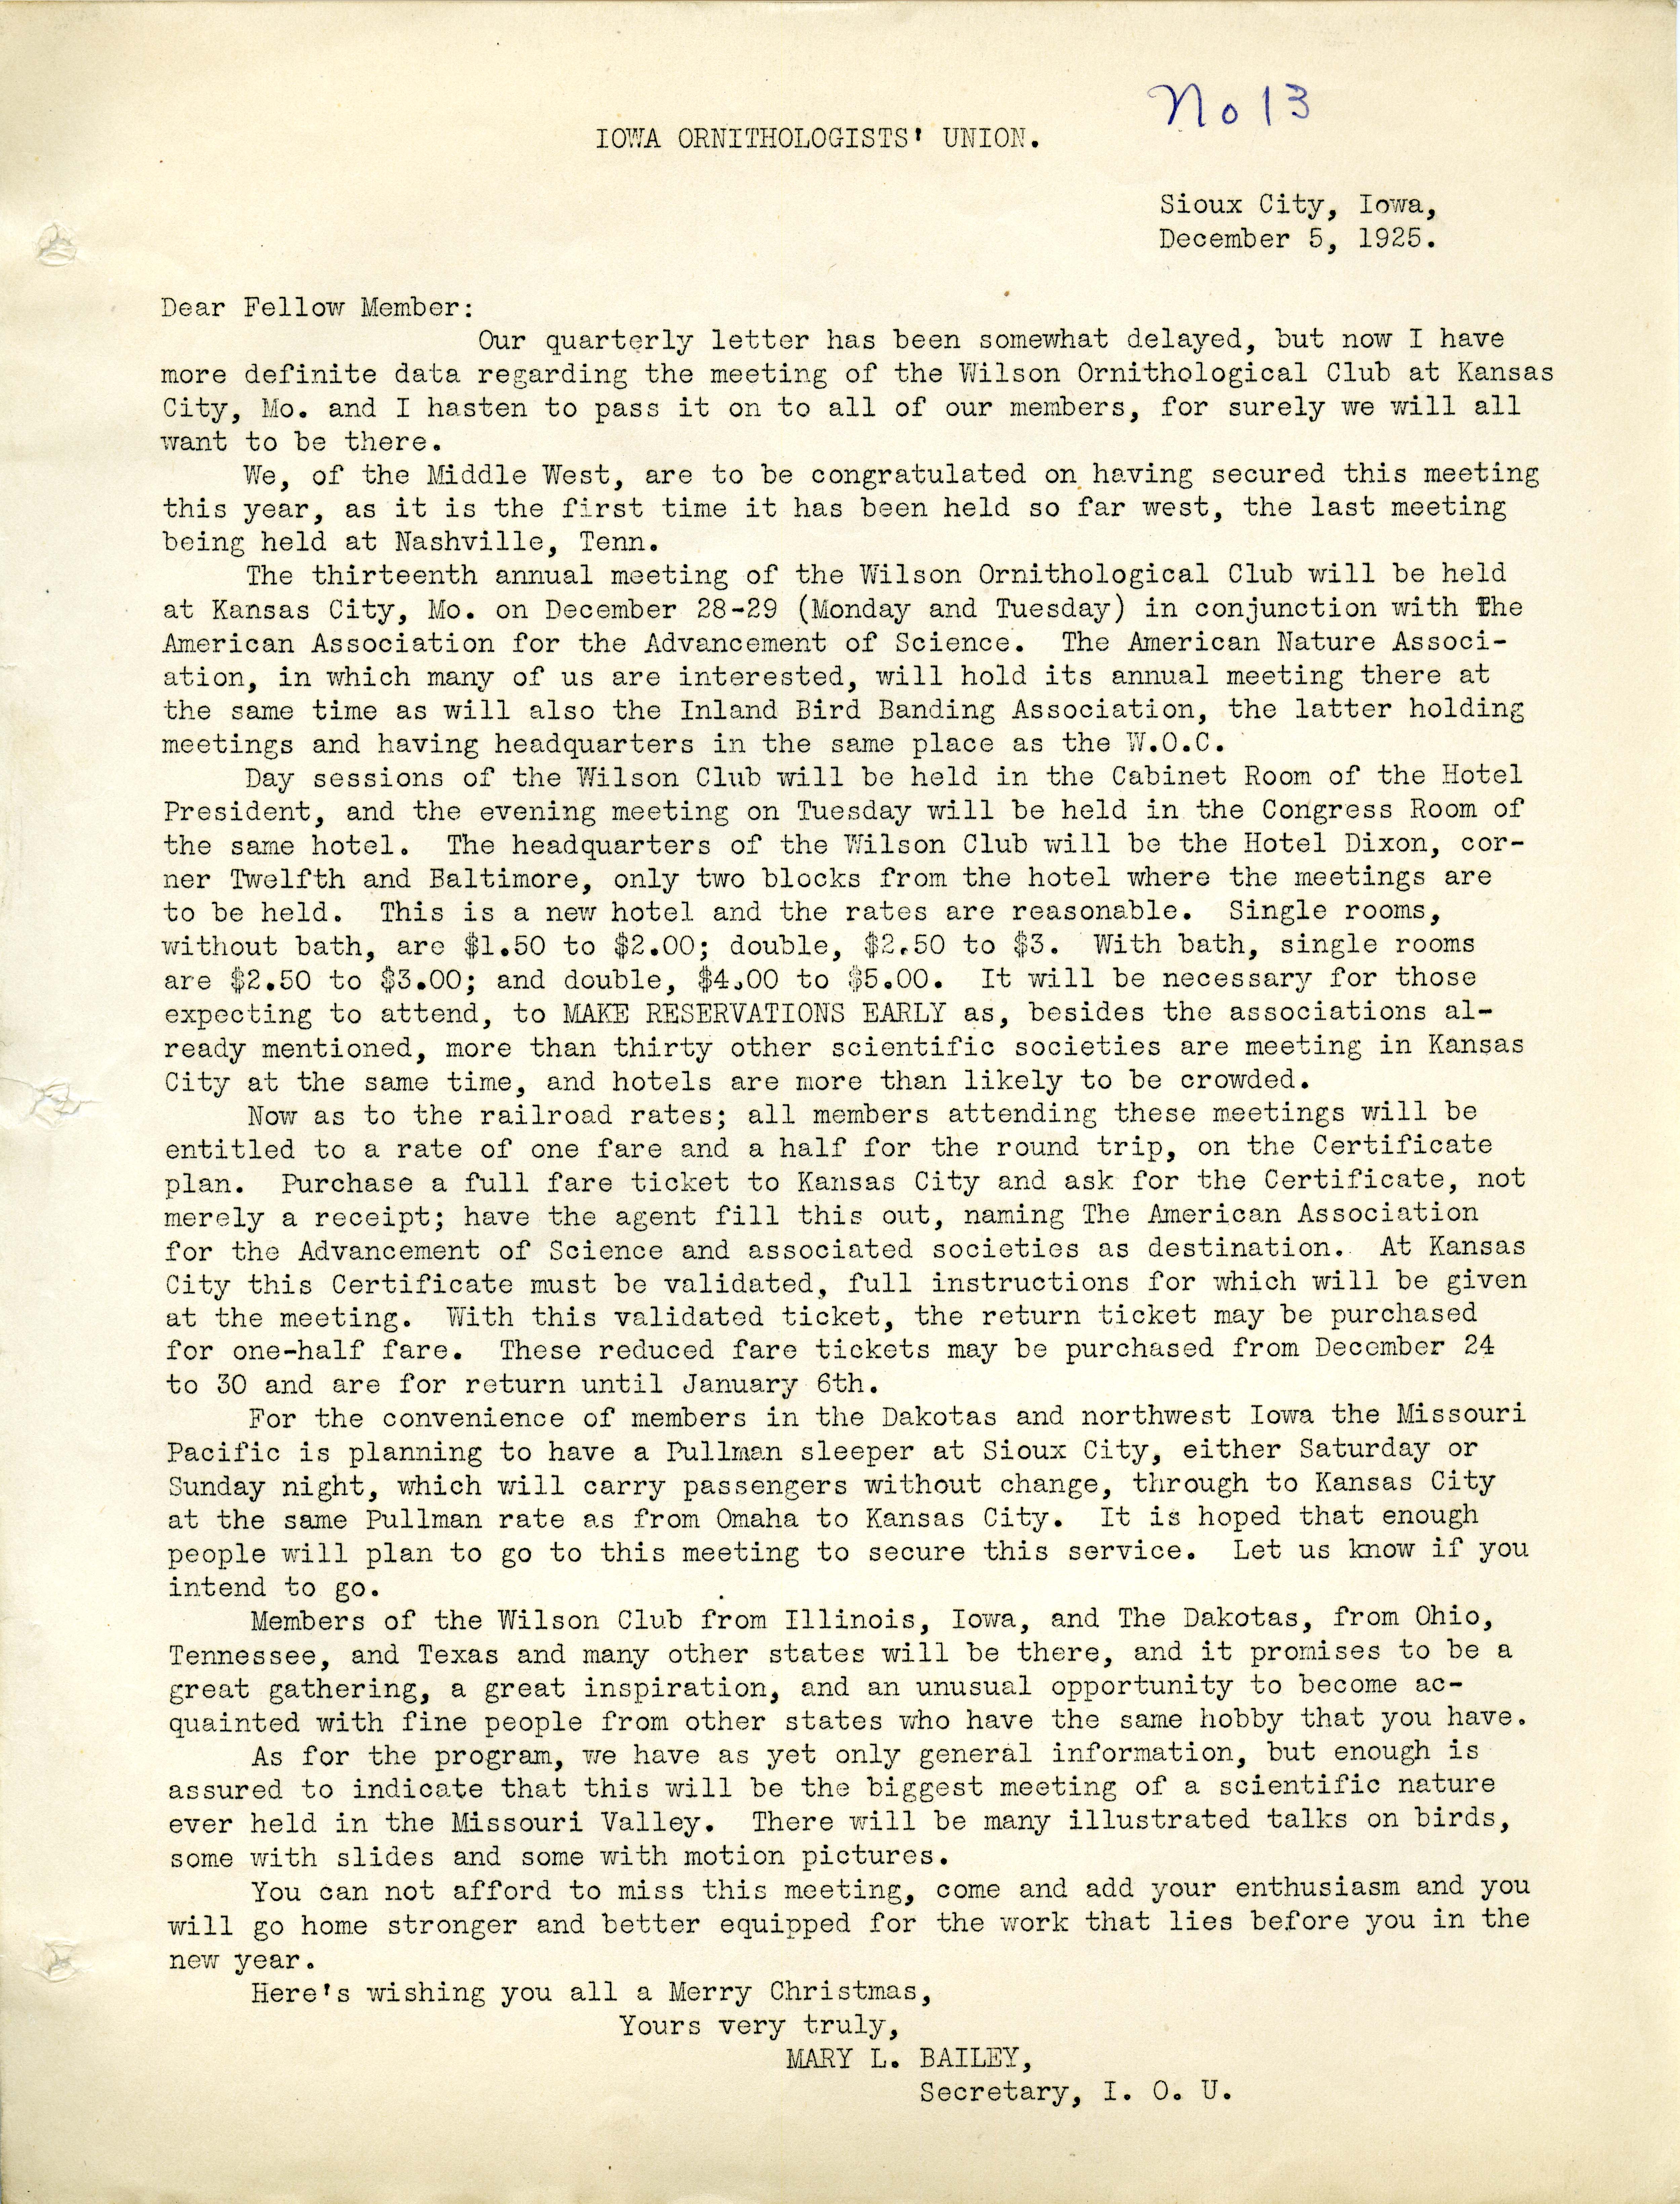 Letter to members of the Iowa Ornithologists' Union regarding the annual meeting of the Wilson Ornithological Club, December 5, 1925